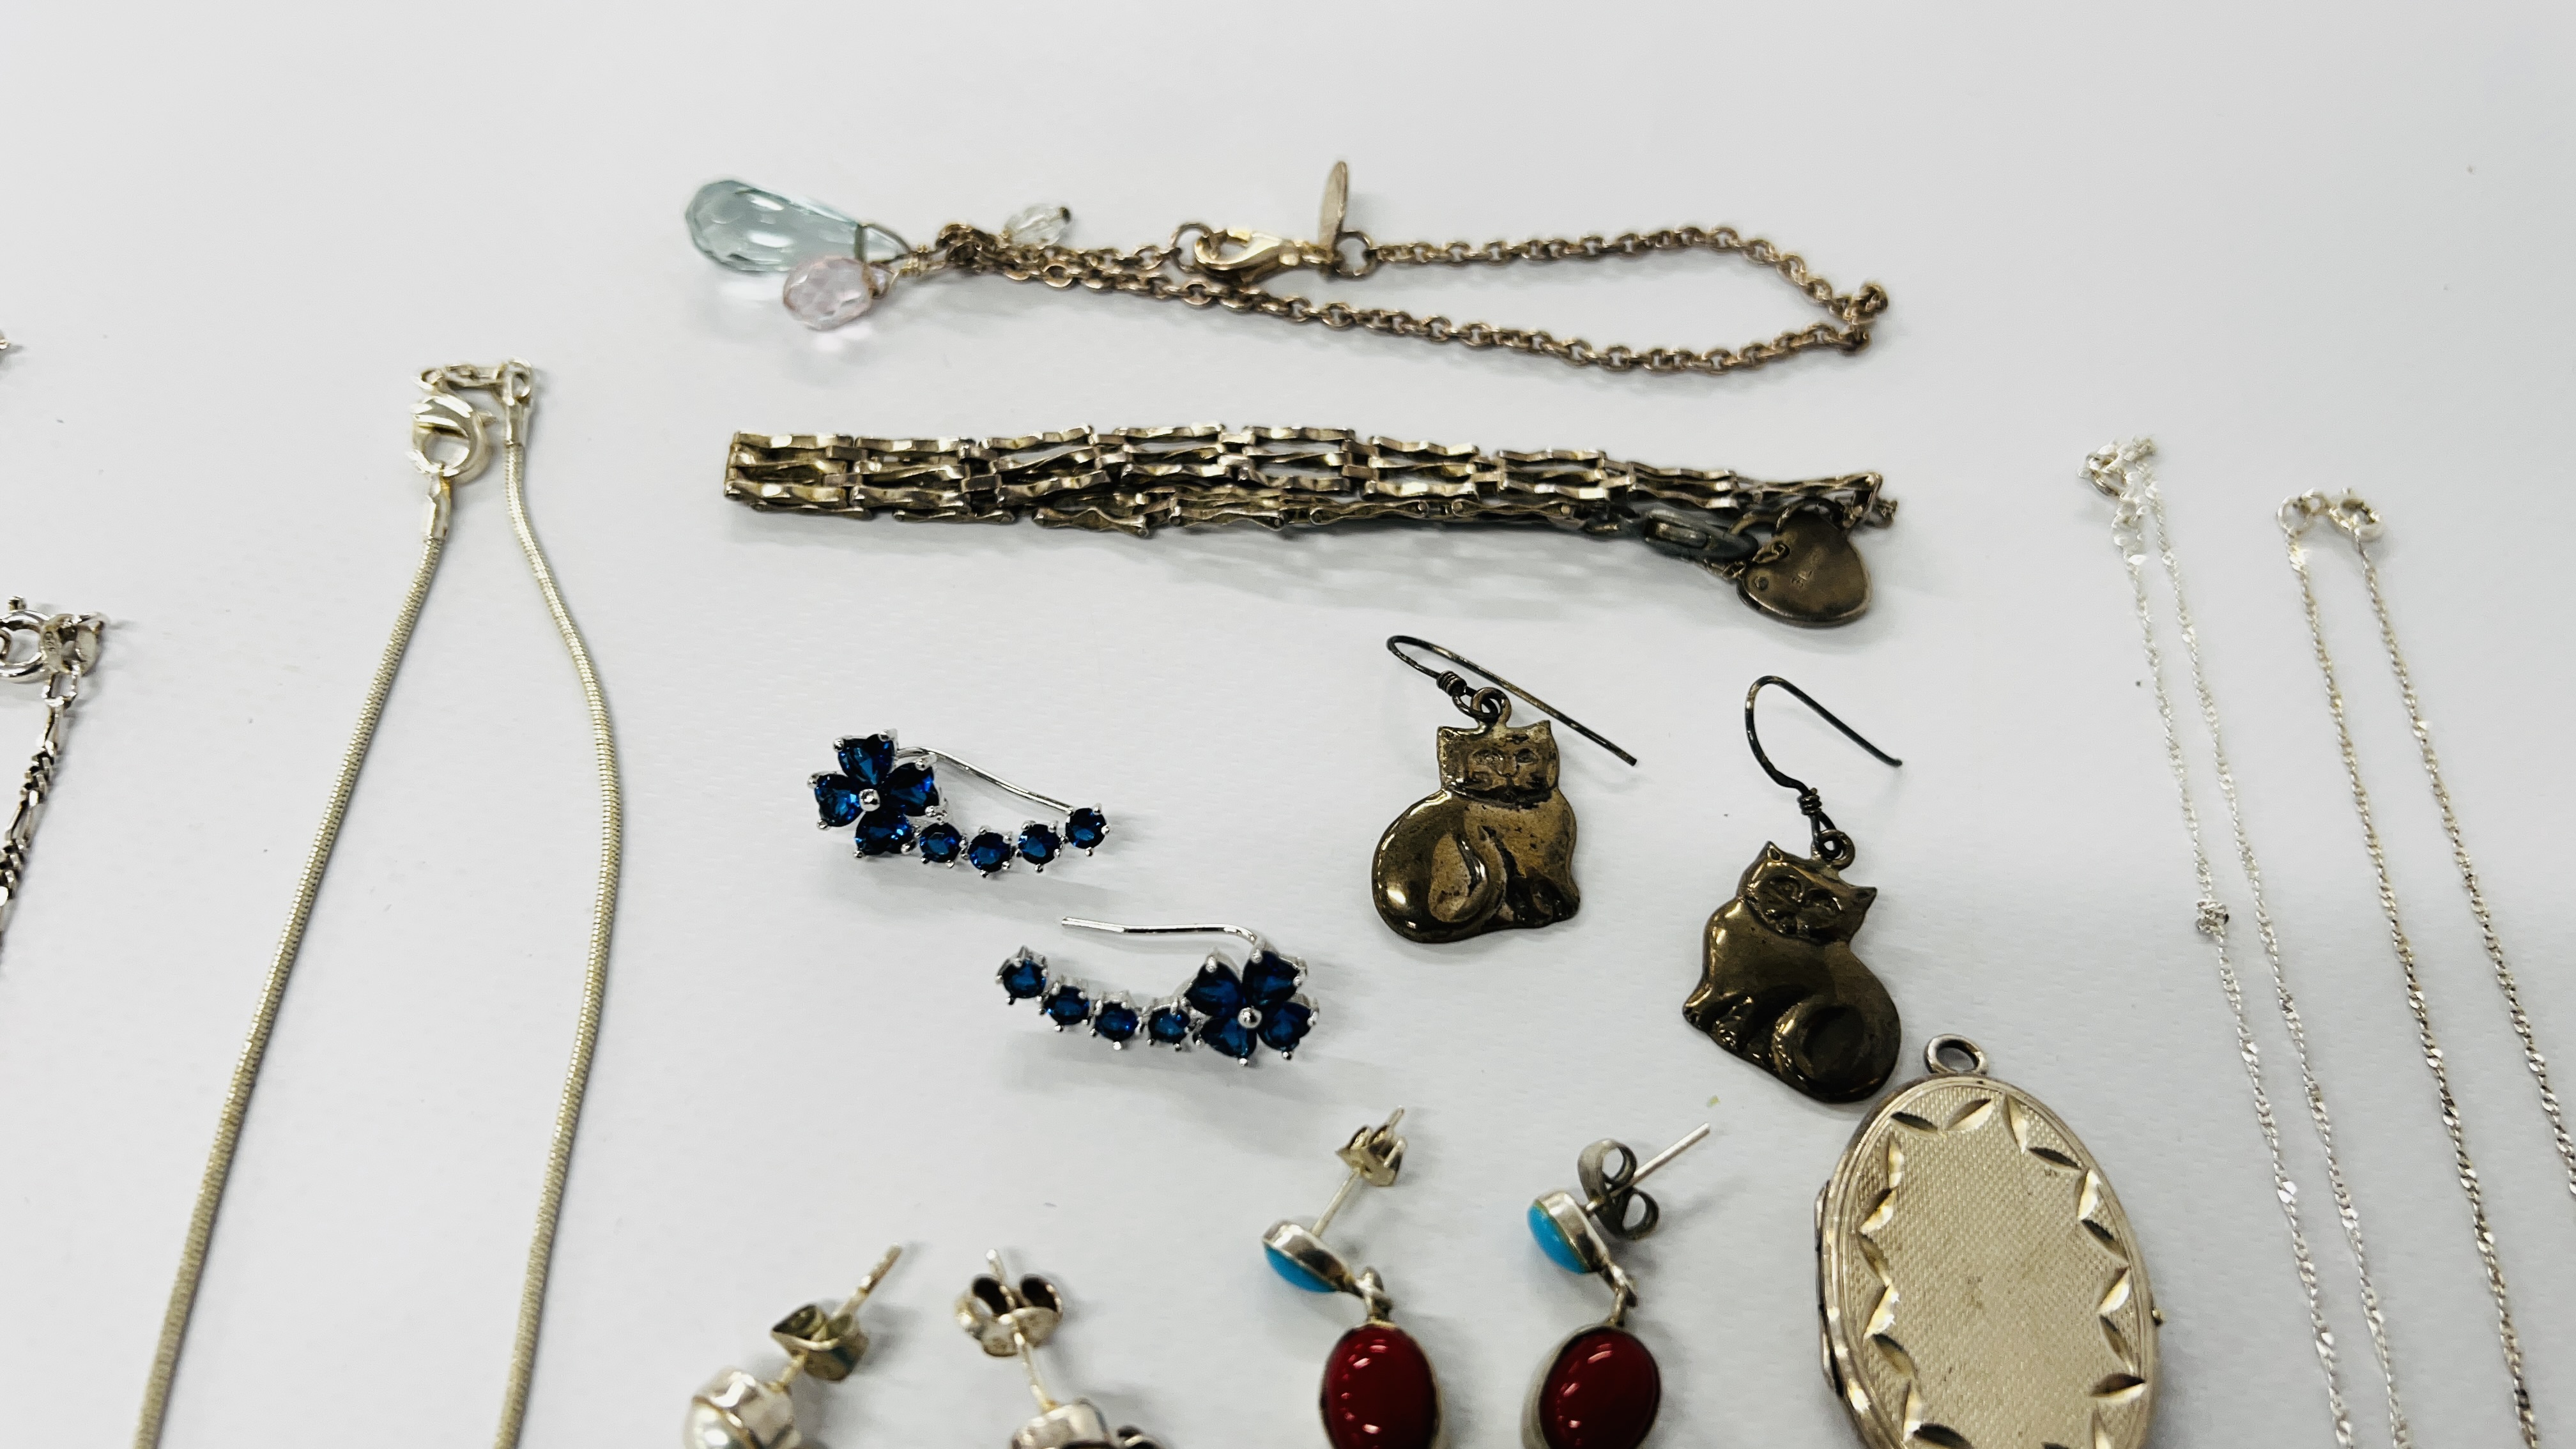 A TRAY OF SILVER, WHITE METAL PENDANTS, LOCKETS, BRACELETS AND EARRINGS. - Image 6 of 9